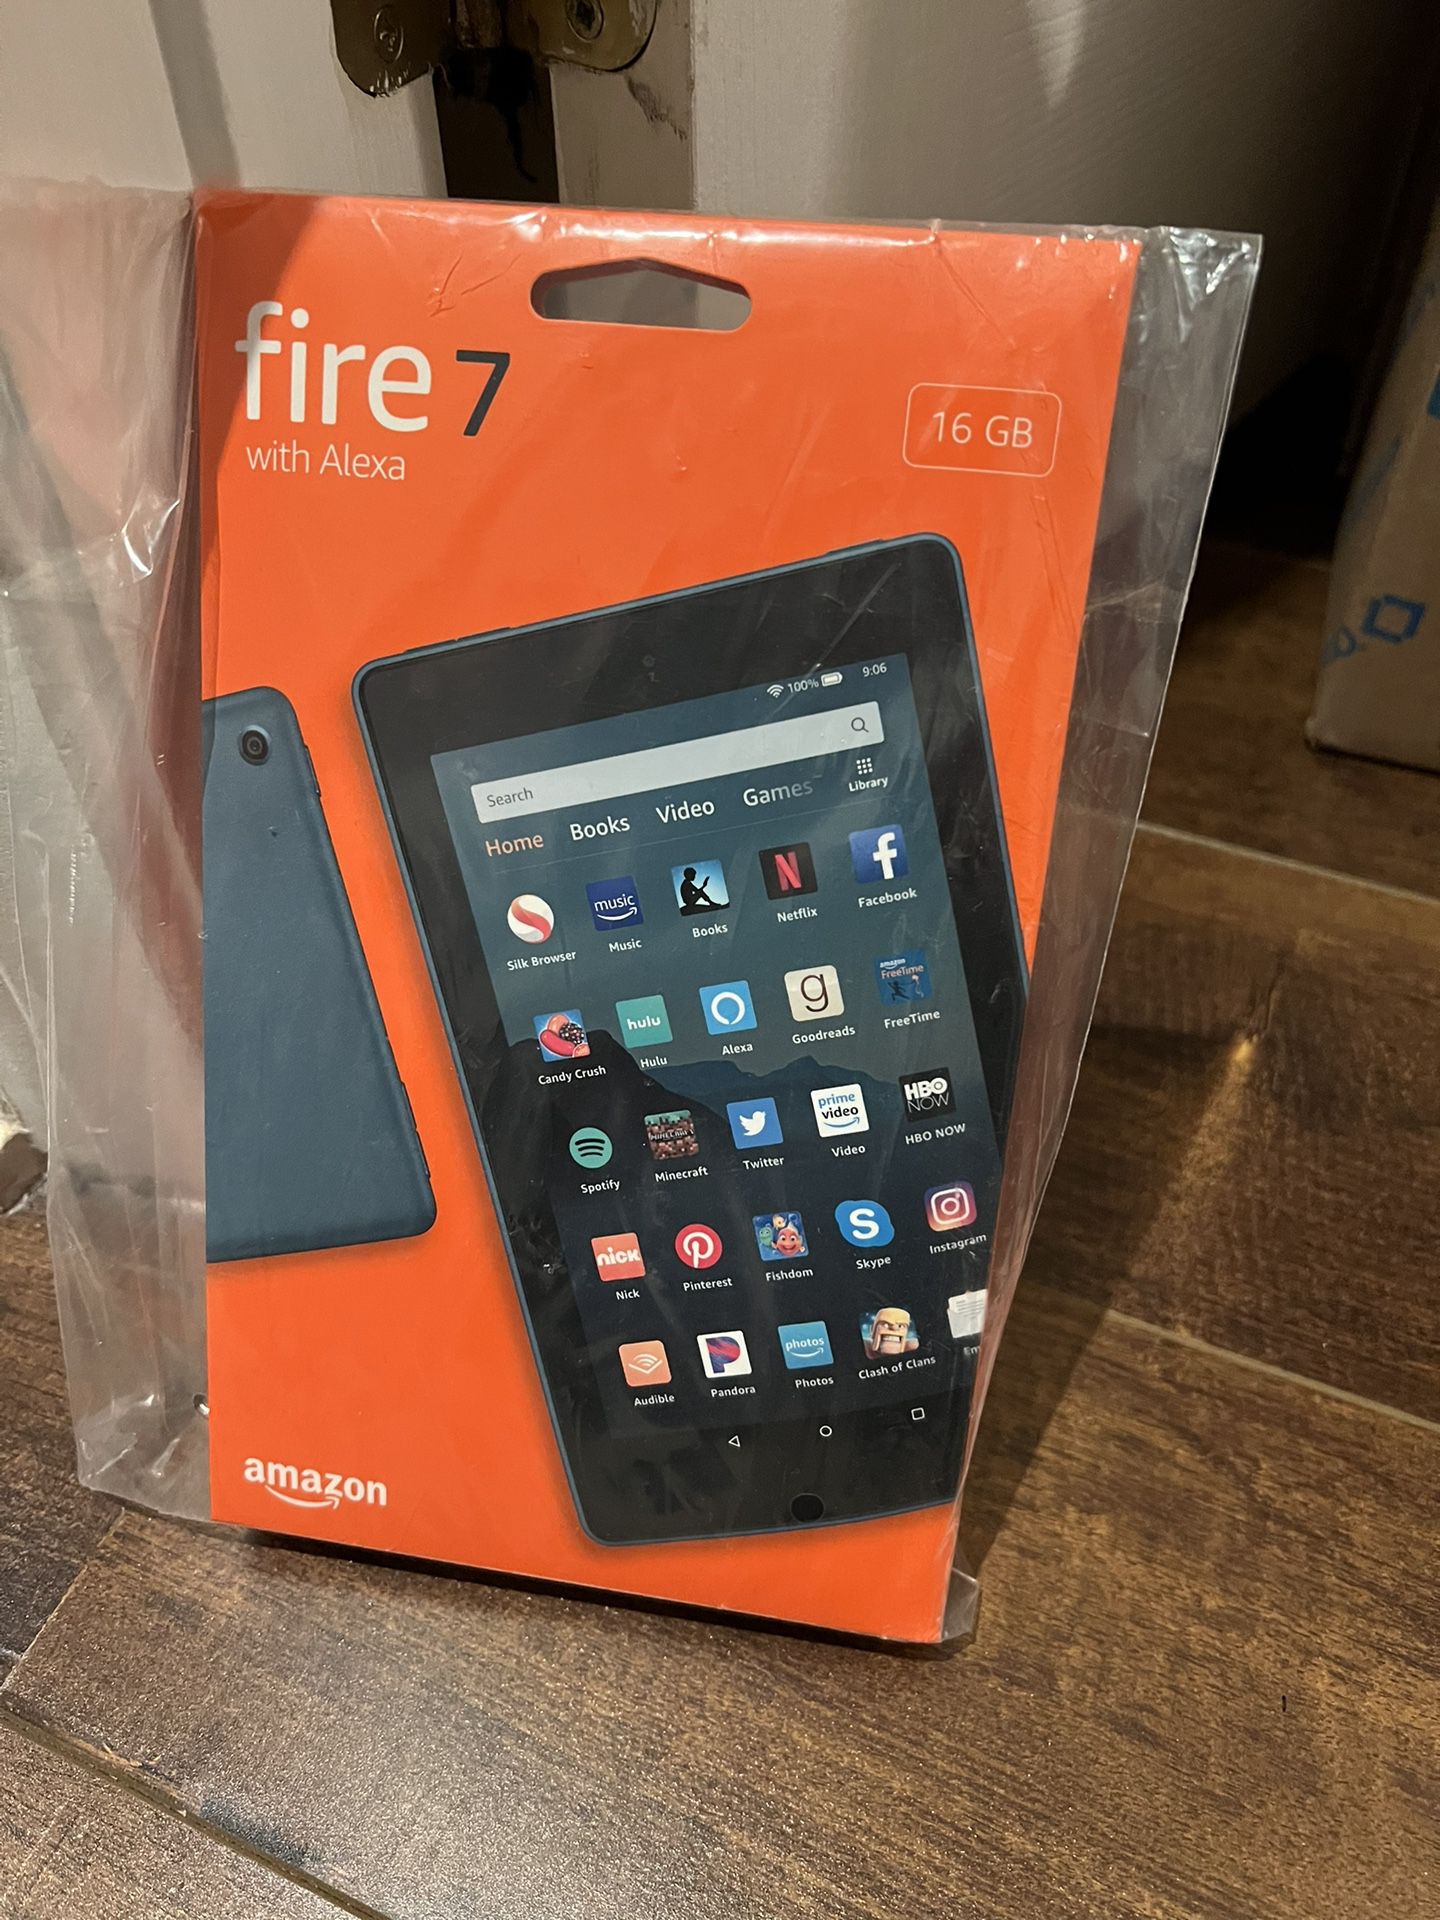 Amazon Fire 7 Tablet (9th Generation)